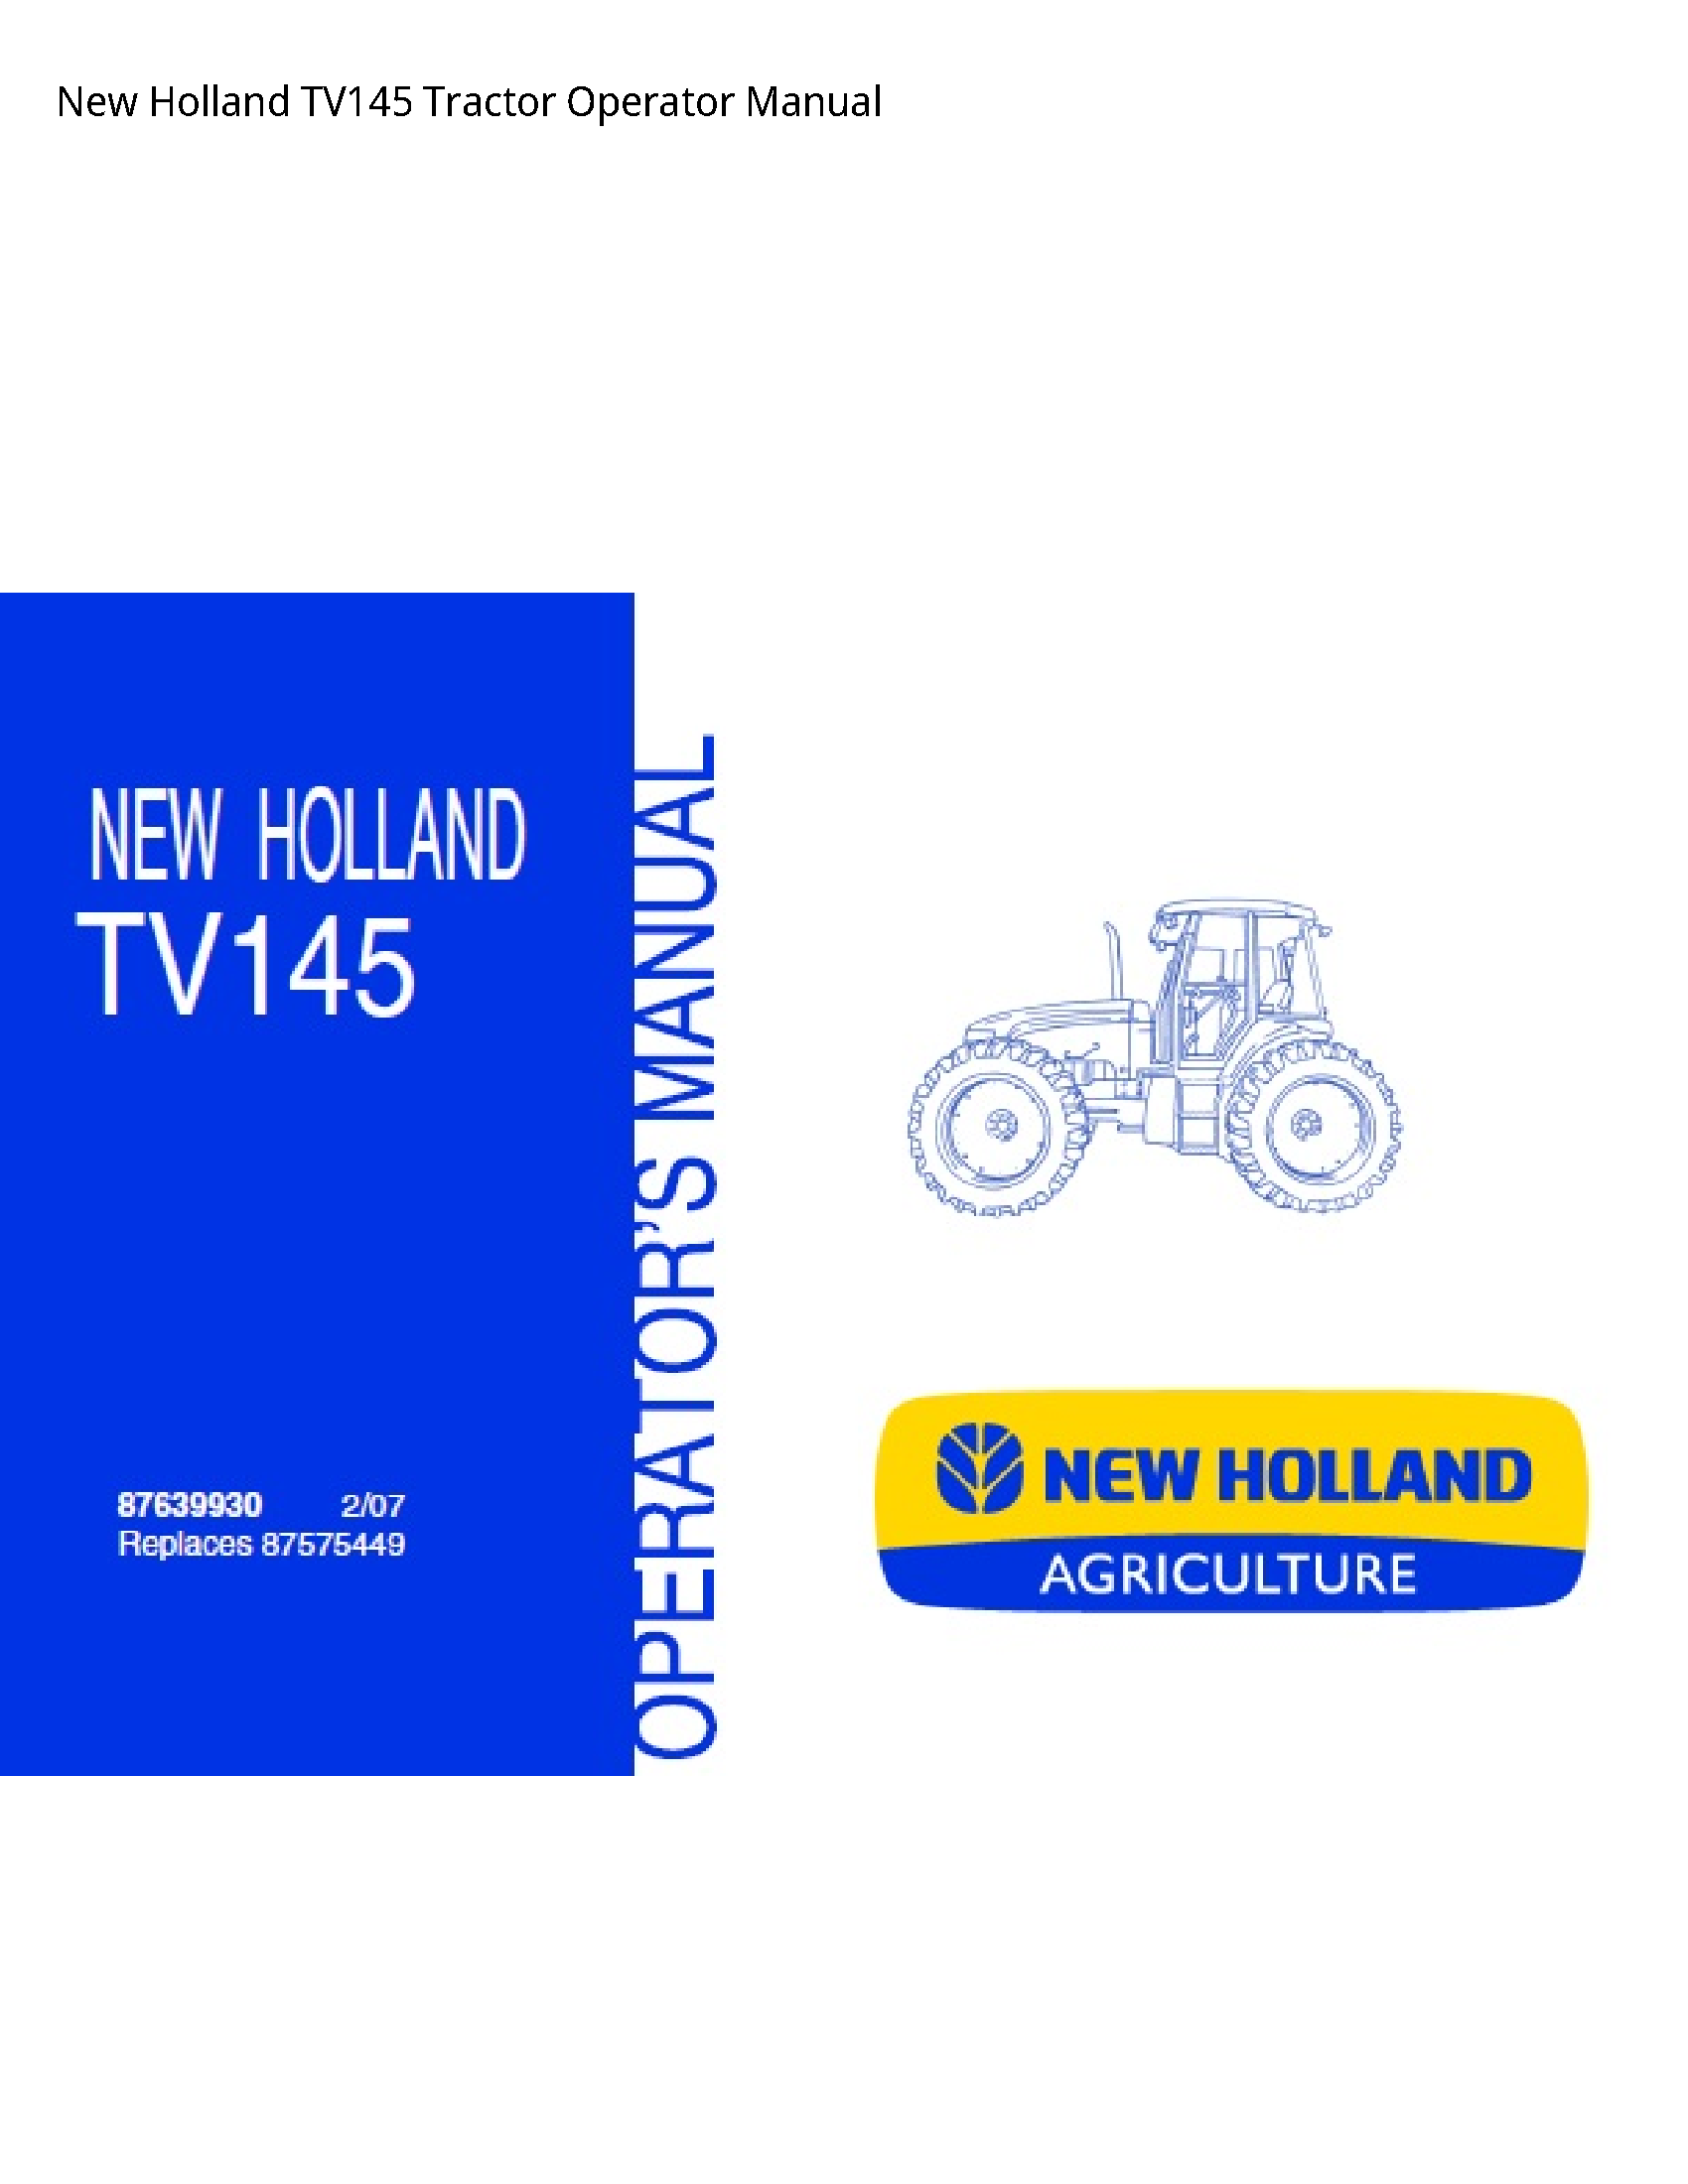 New Holland TV145 Tractor Operator manual